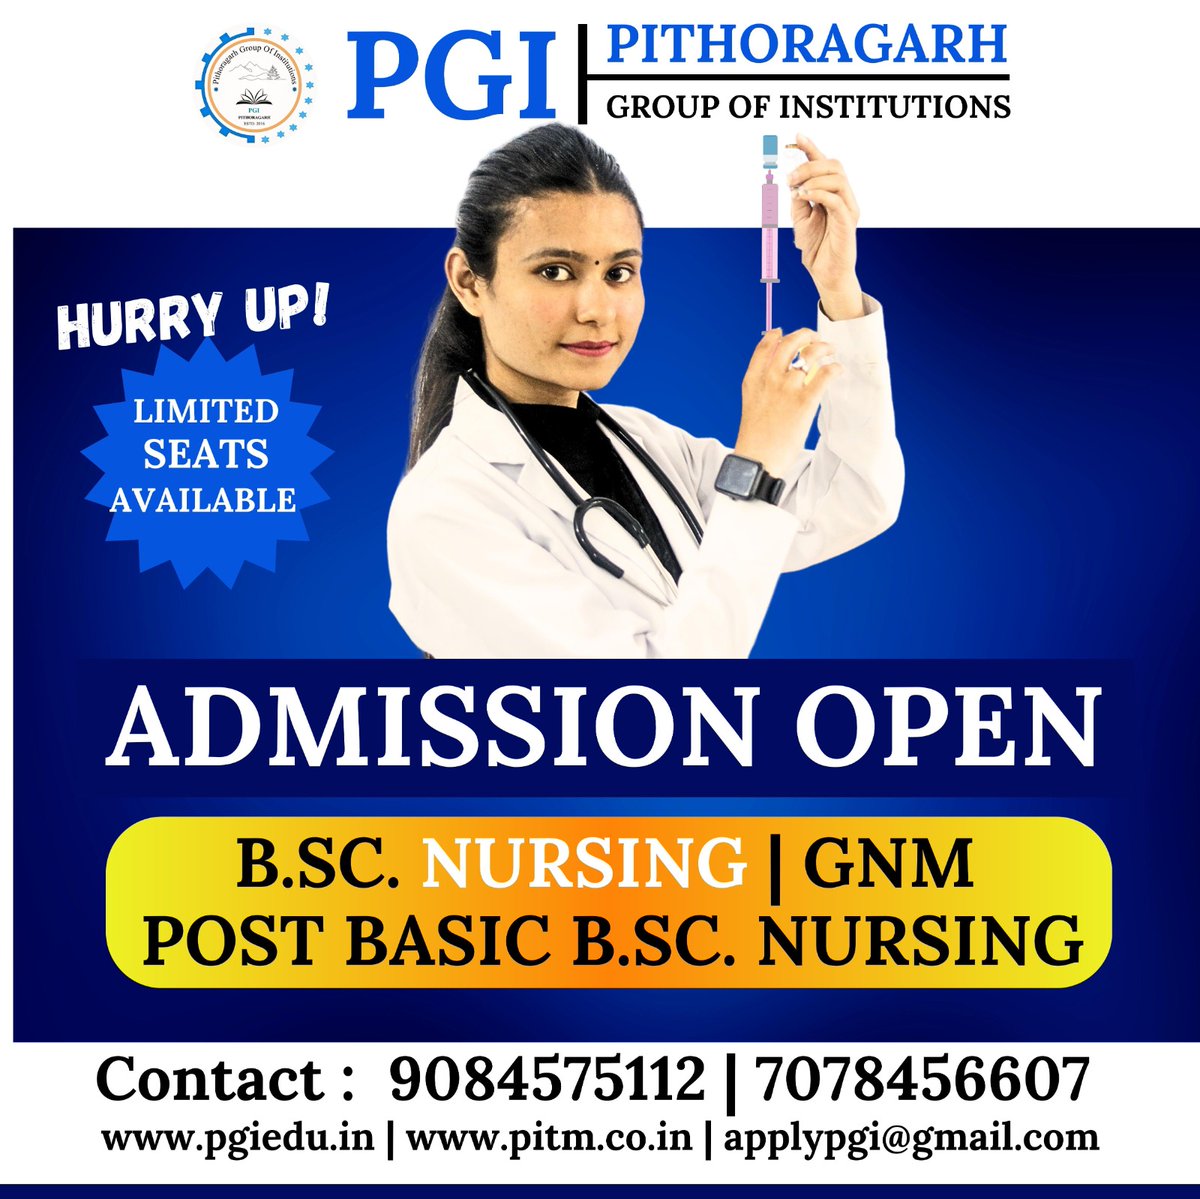 'Nursing: the art of caring, the science of healing. #NursePower'

PGI Pithoragarh Provides world-class education with up to 100% placement assistance.

Admissions Open 2023-2024
Call us at 9084575112,7078456607
💌 Mail Us on applypgi@gmail.com
💜 Follow Us To Know More